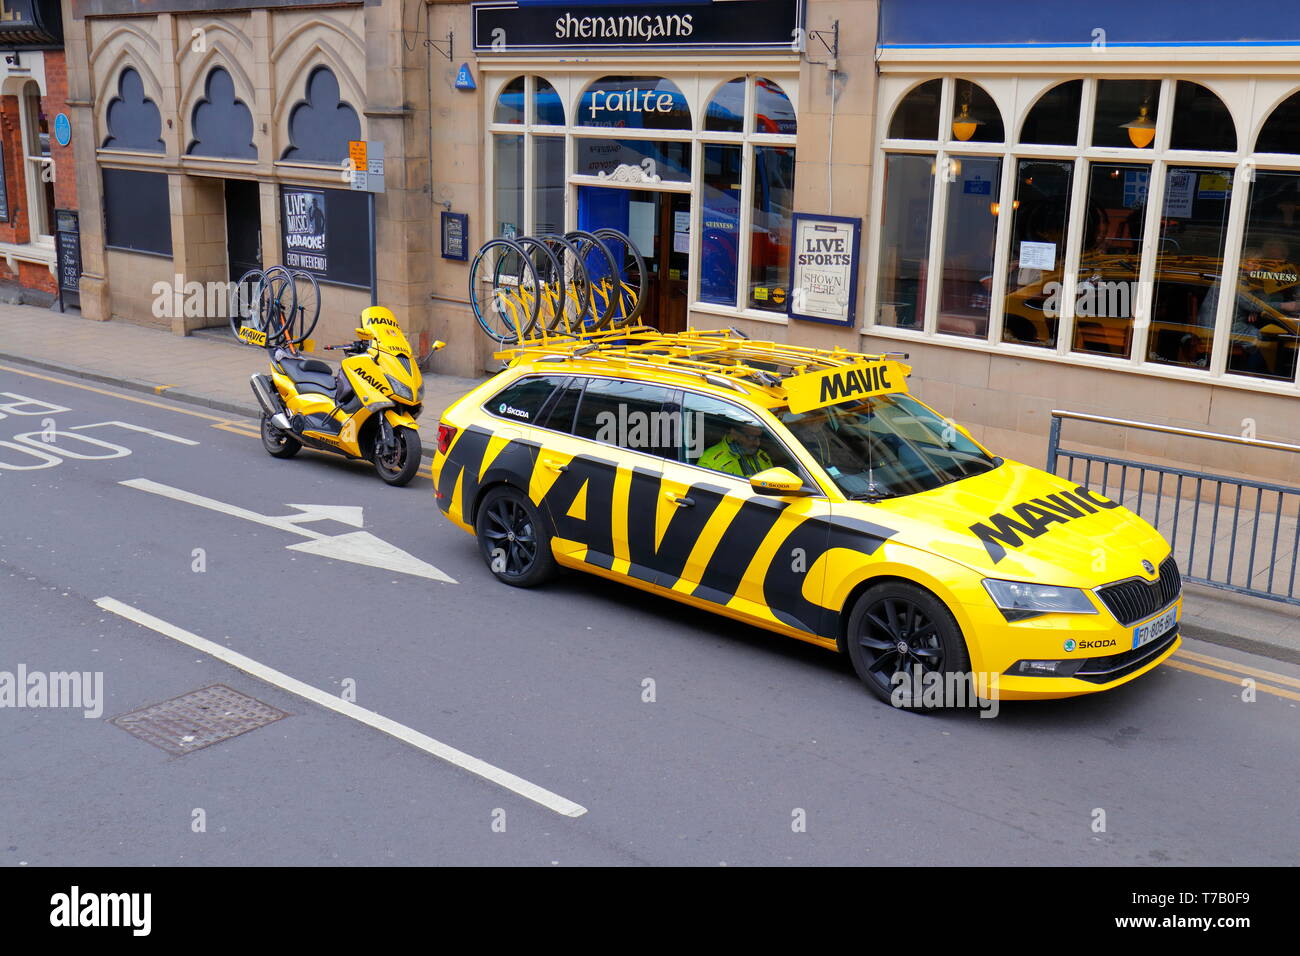 Mavic support vehicle of the, parked outside Shenanigans Irish Bar in Leeds City Centre during Stage 4 of the Tour De Yorkshire Cycle Race Stock Photo